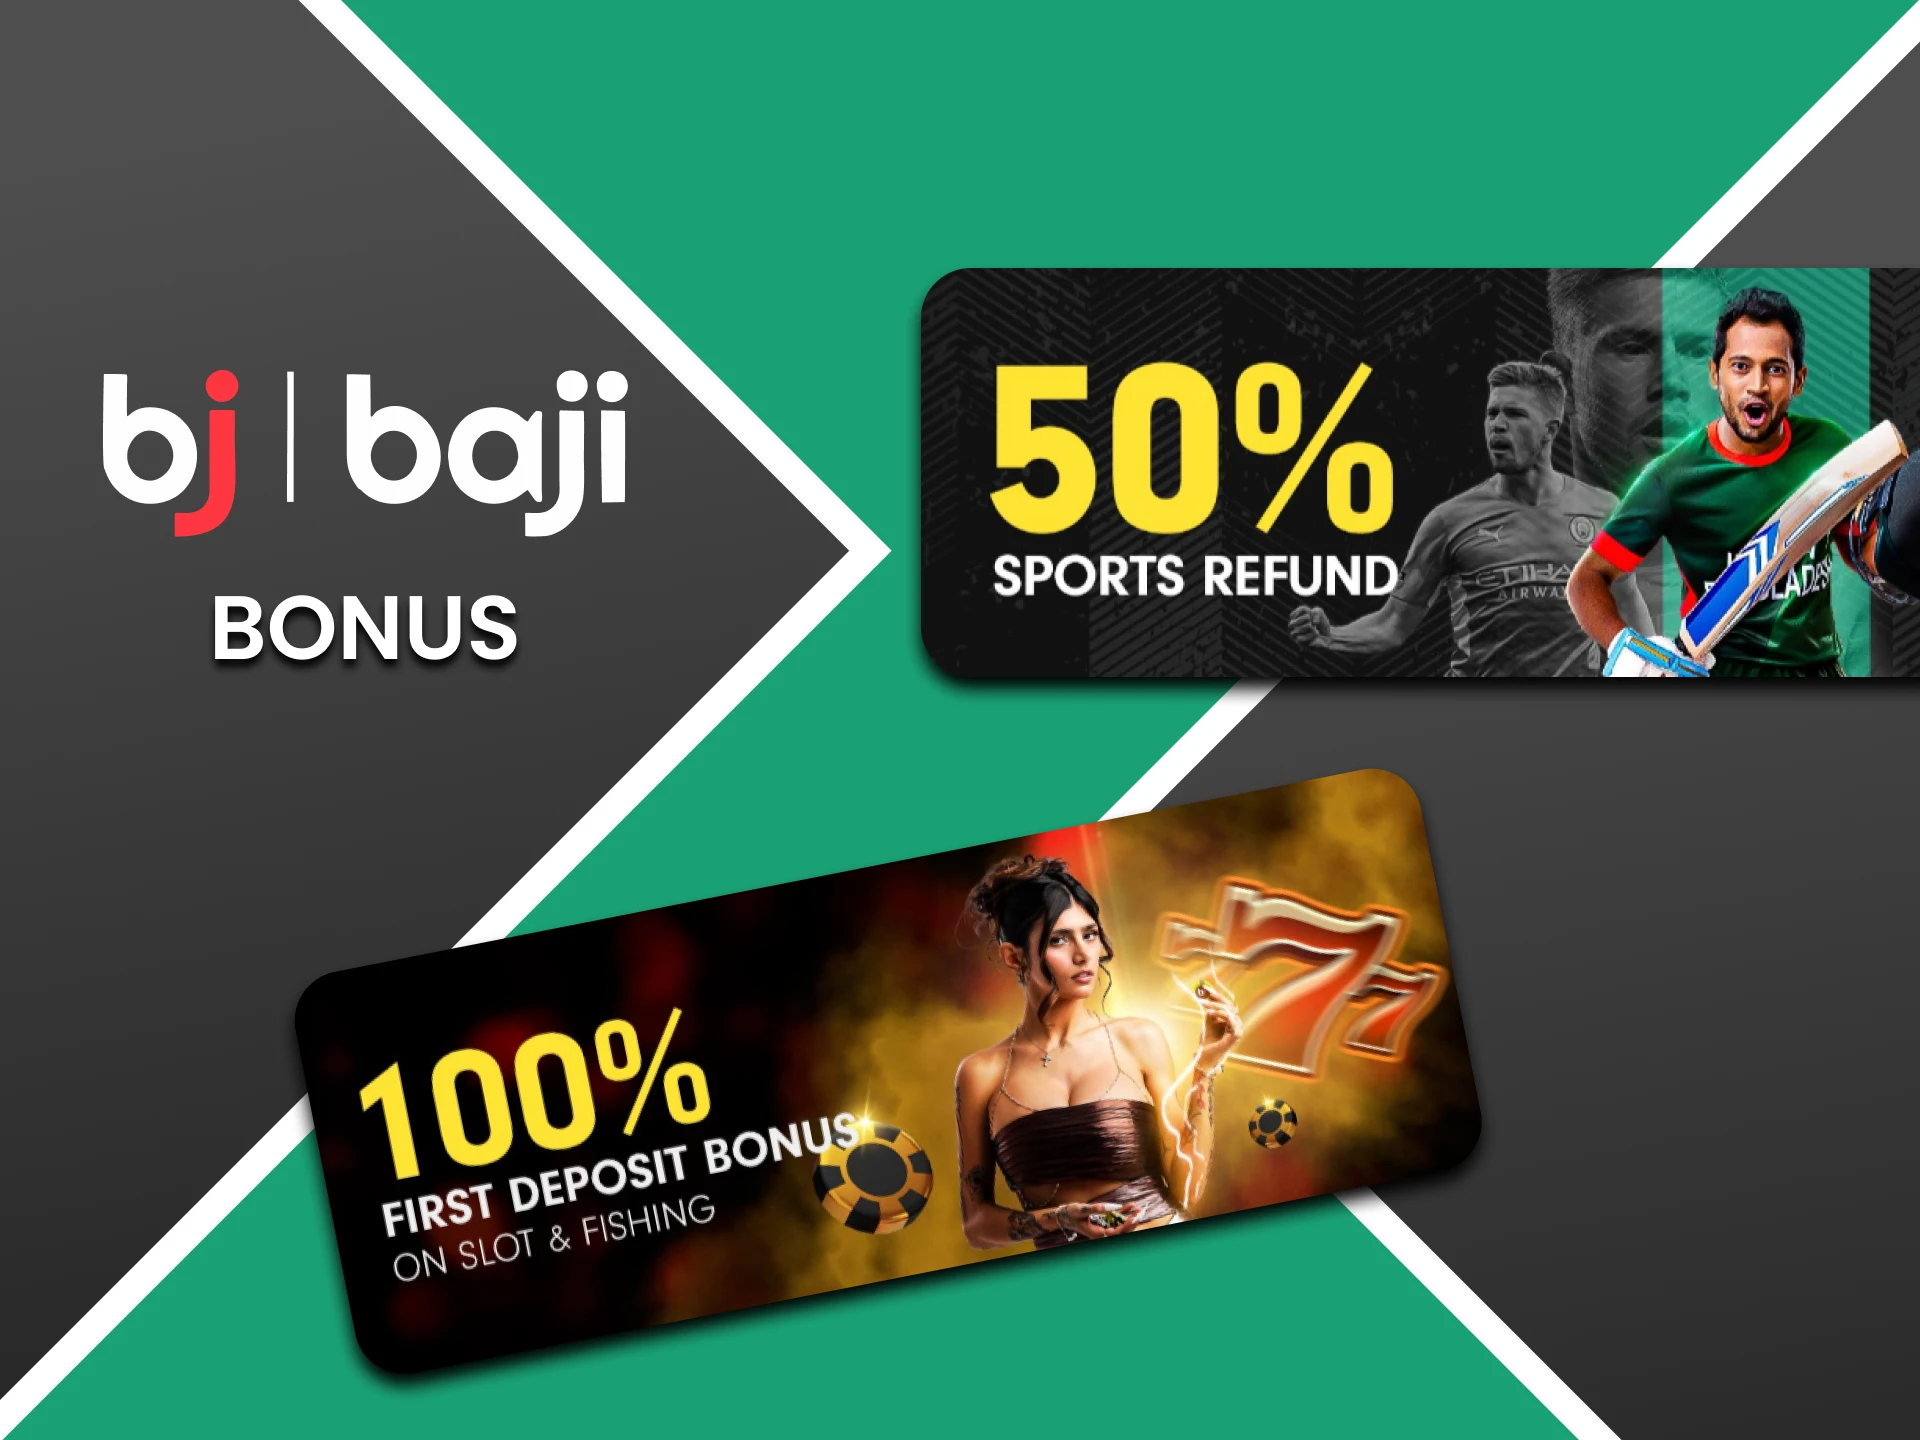 By replenishing your deposit you receive bonuses from Baji.